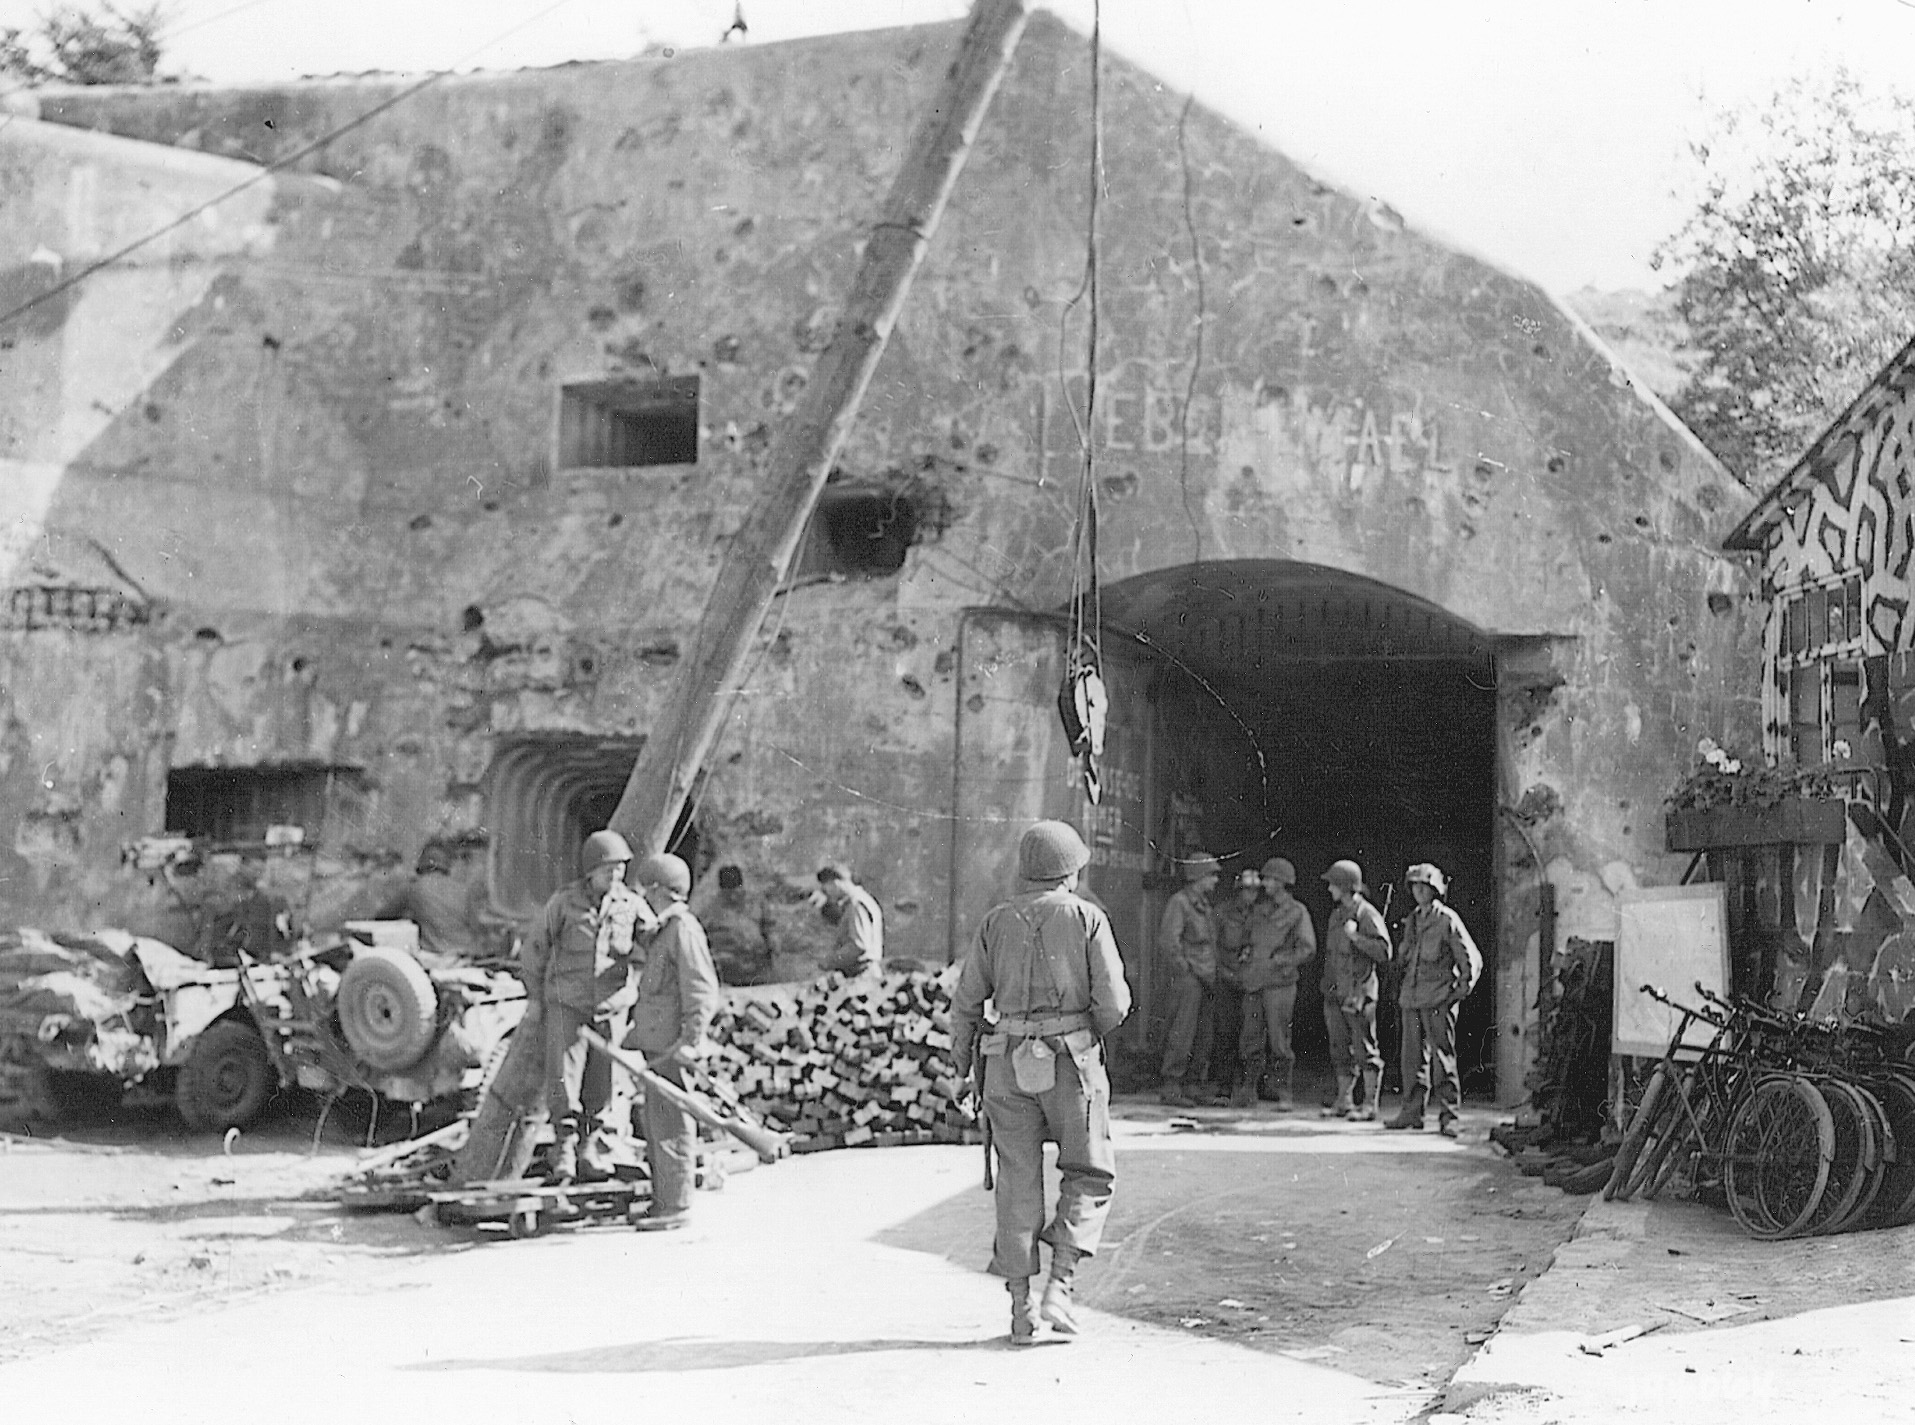 American soldiers mill around the entrance to Eben Emael in 1945. Damage from shell fire is apparent in both photos.